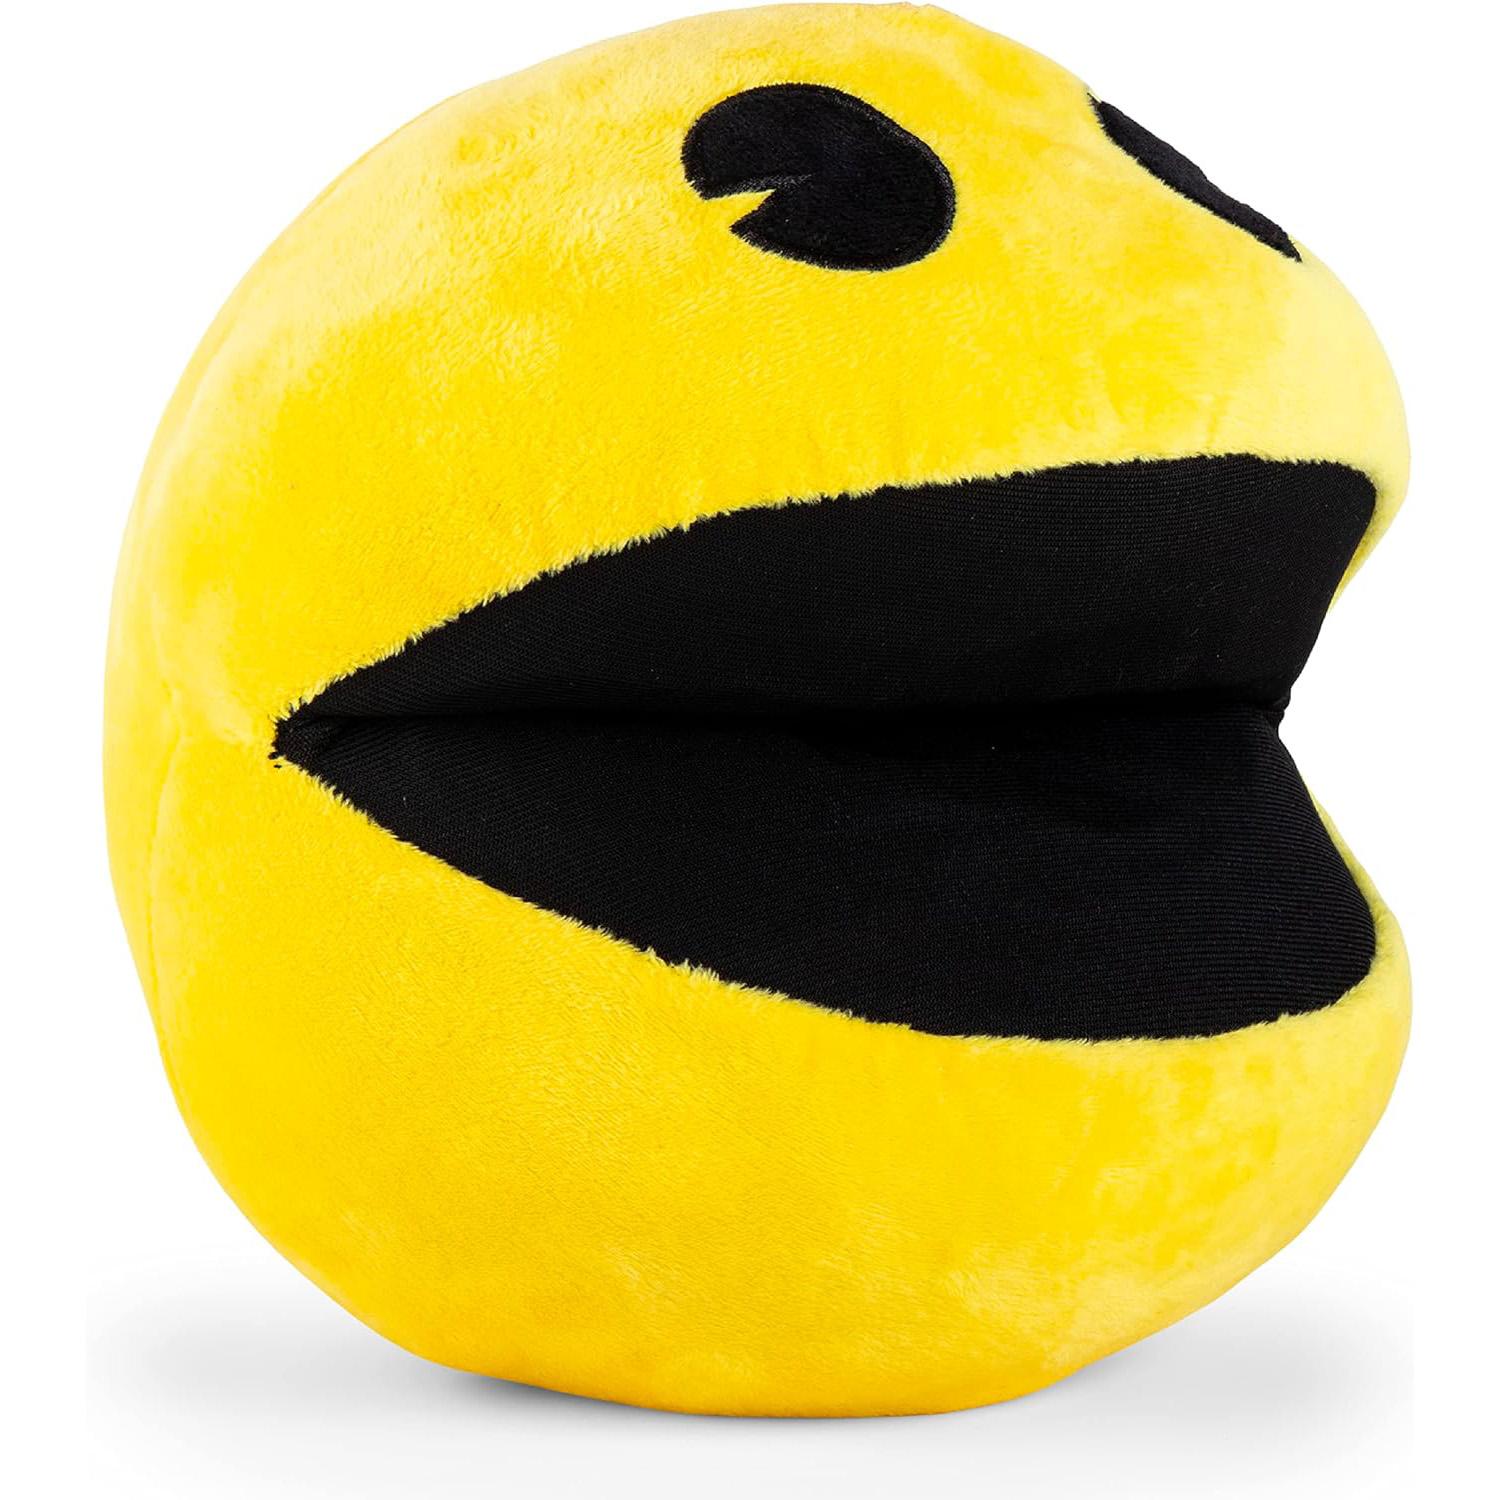 Pac-Man for Pets 8in Plush Sweak Toy for Dogs for $7.99